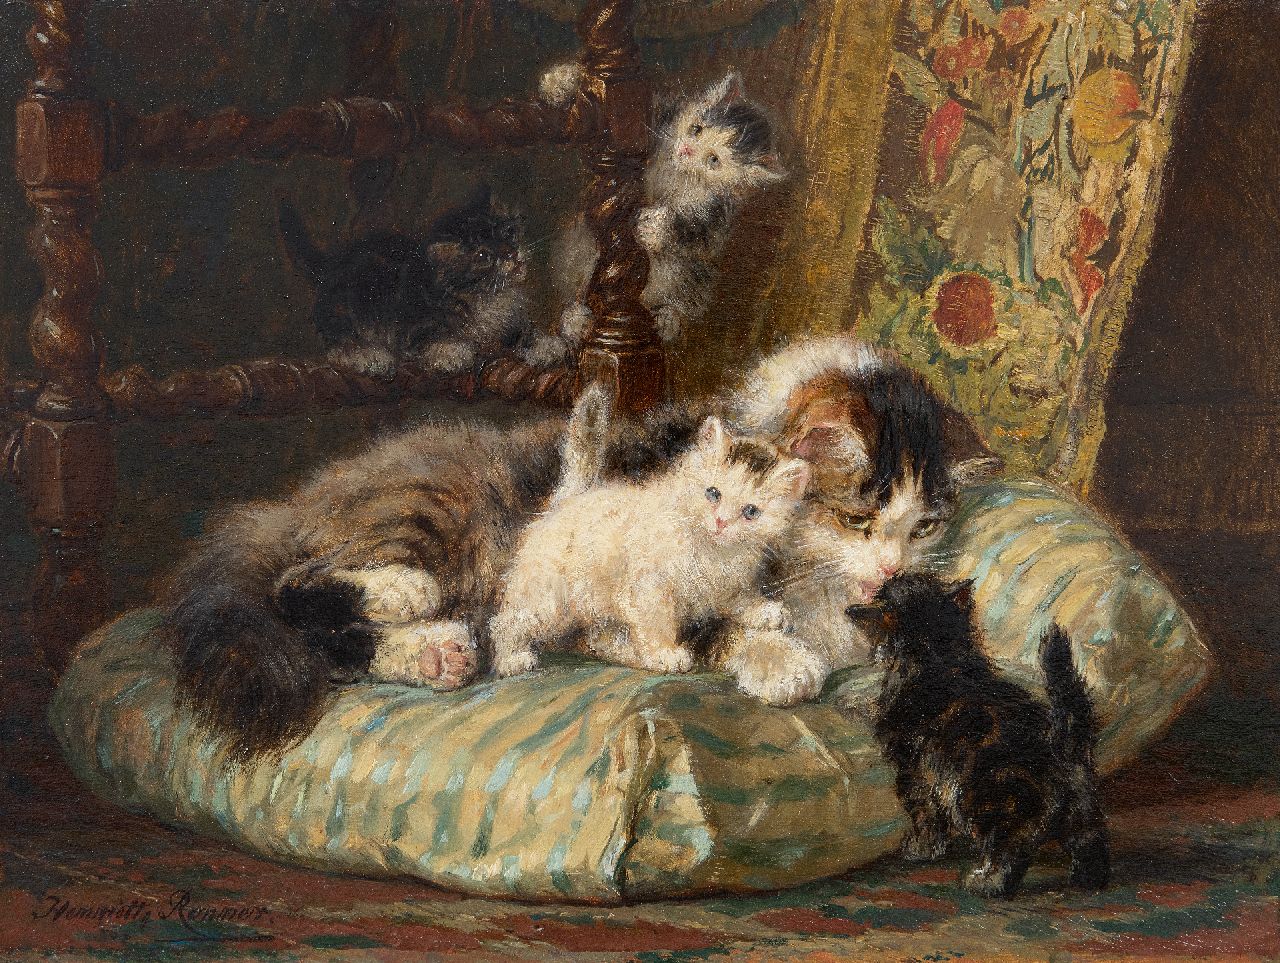 Ronner-Knip H.  | Henriette Ronner-Knip, Mother cat with four playing kittens, oil on panel 24.5 x 32.6 cm, signed l.l.